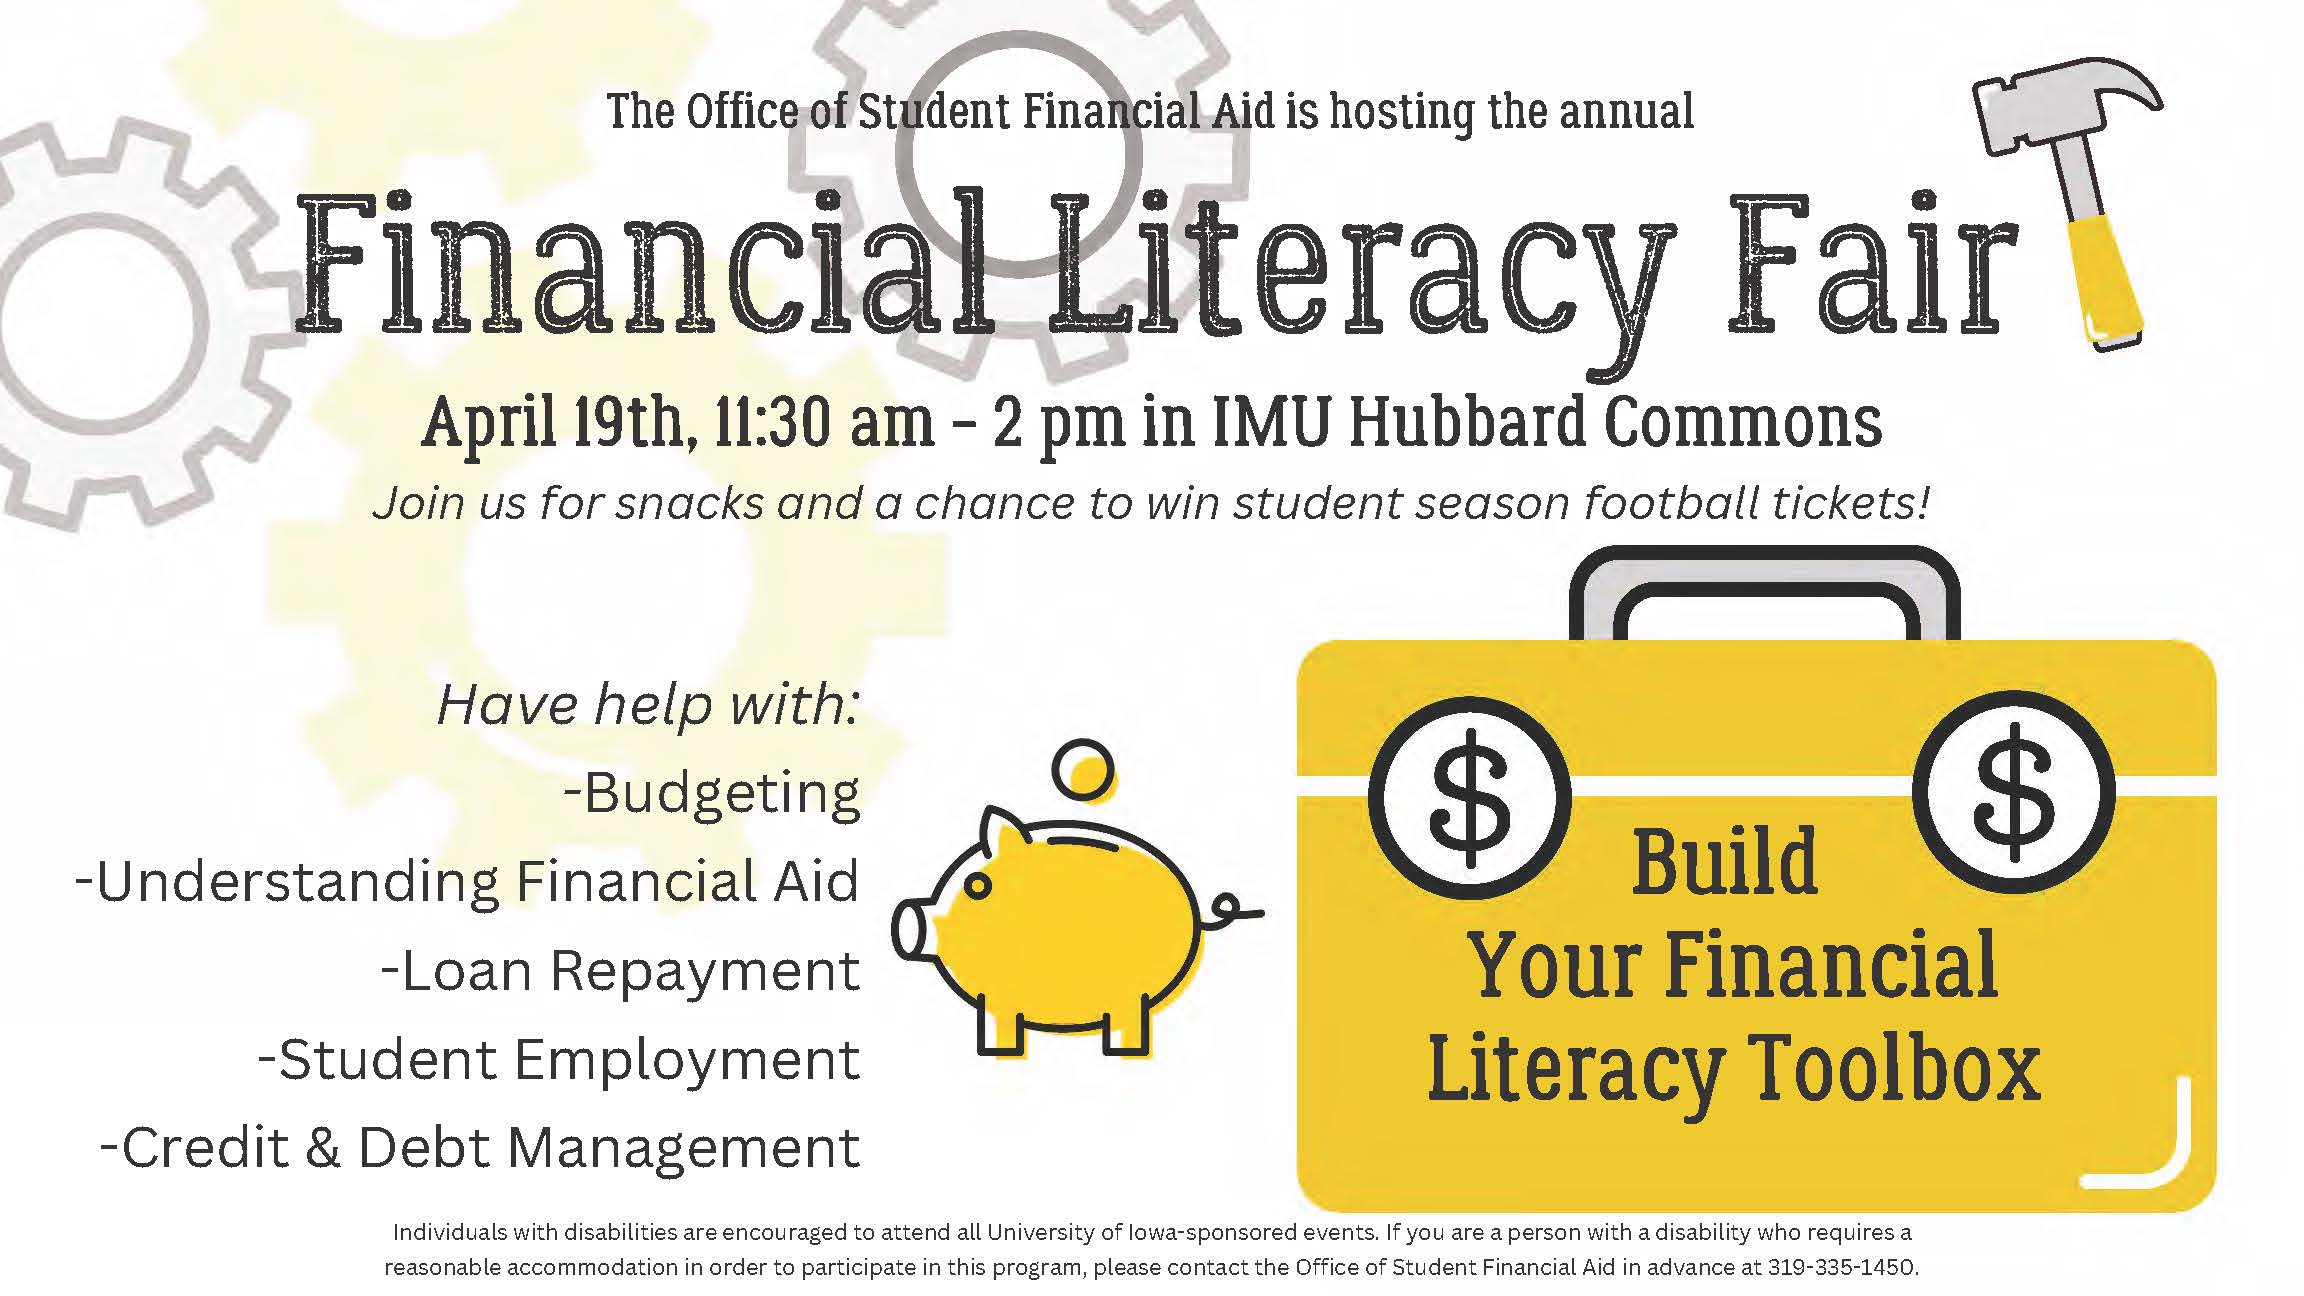 Financial Literacy Fair April 19th 11:30-2:00pm in IMU Hubbard Commons Build your financial literacy toolbox